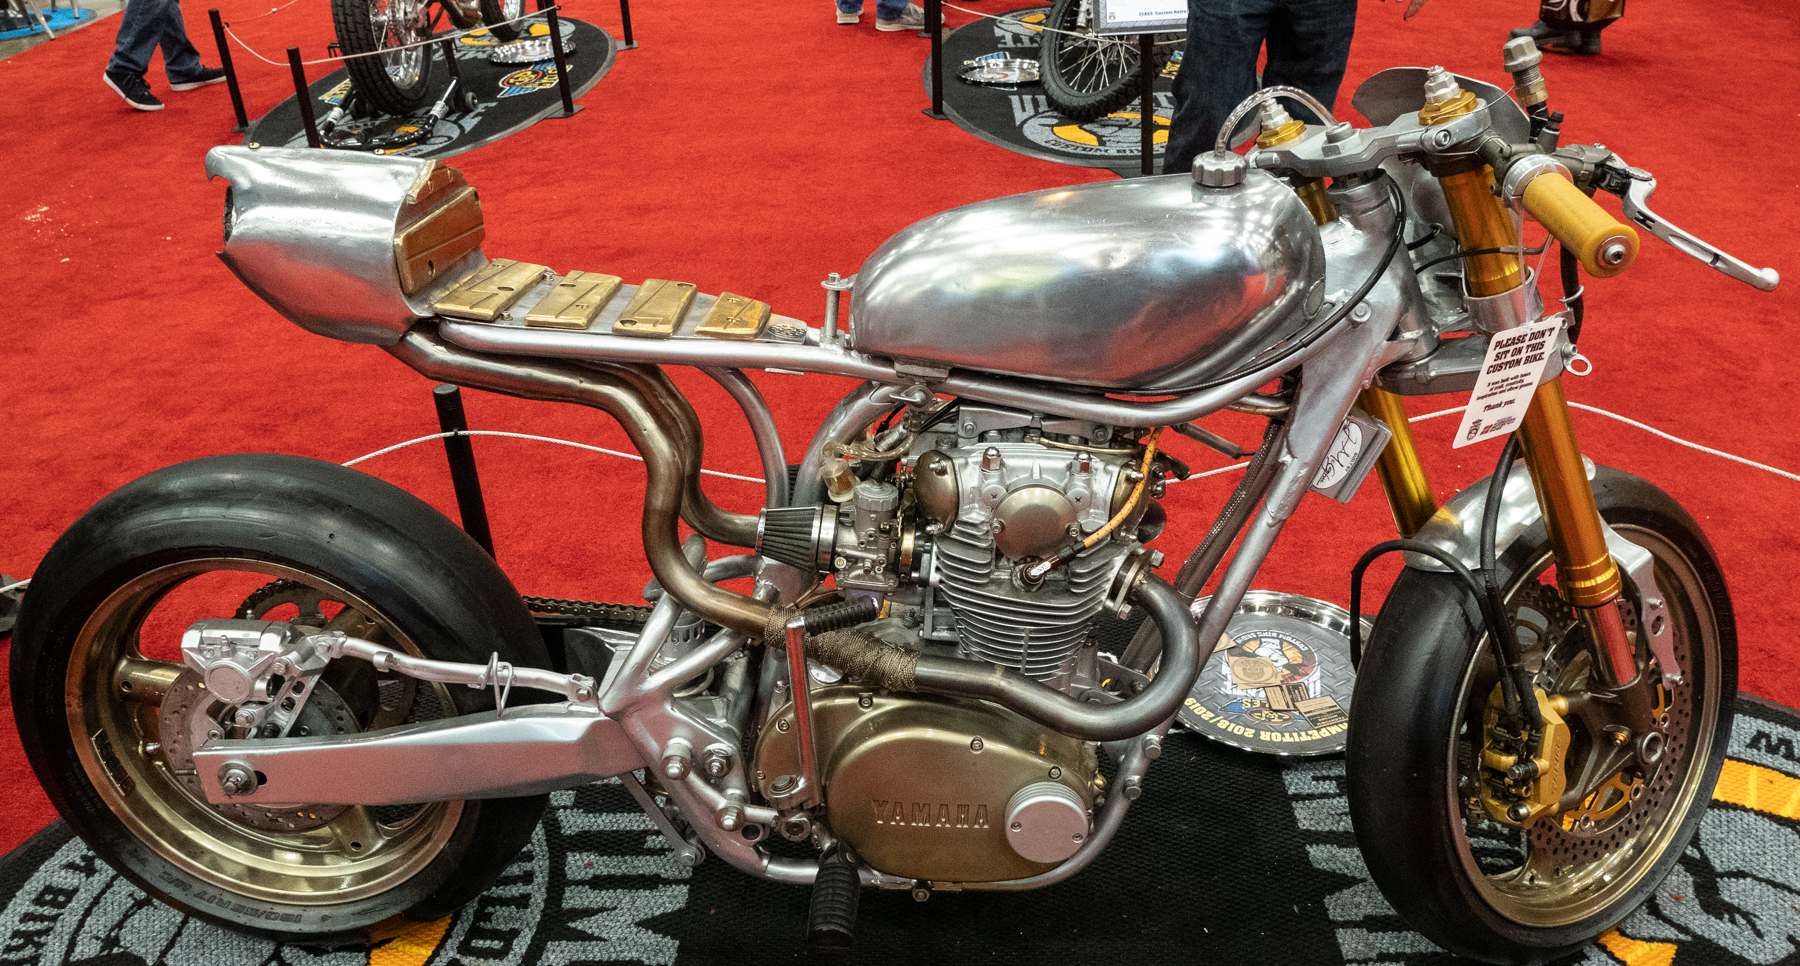 cleveland motorcycle show9 International Motorcycle Shows 2019 in Cleveland